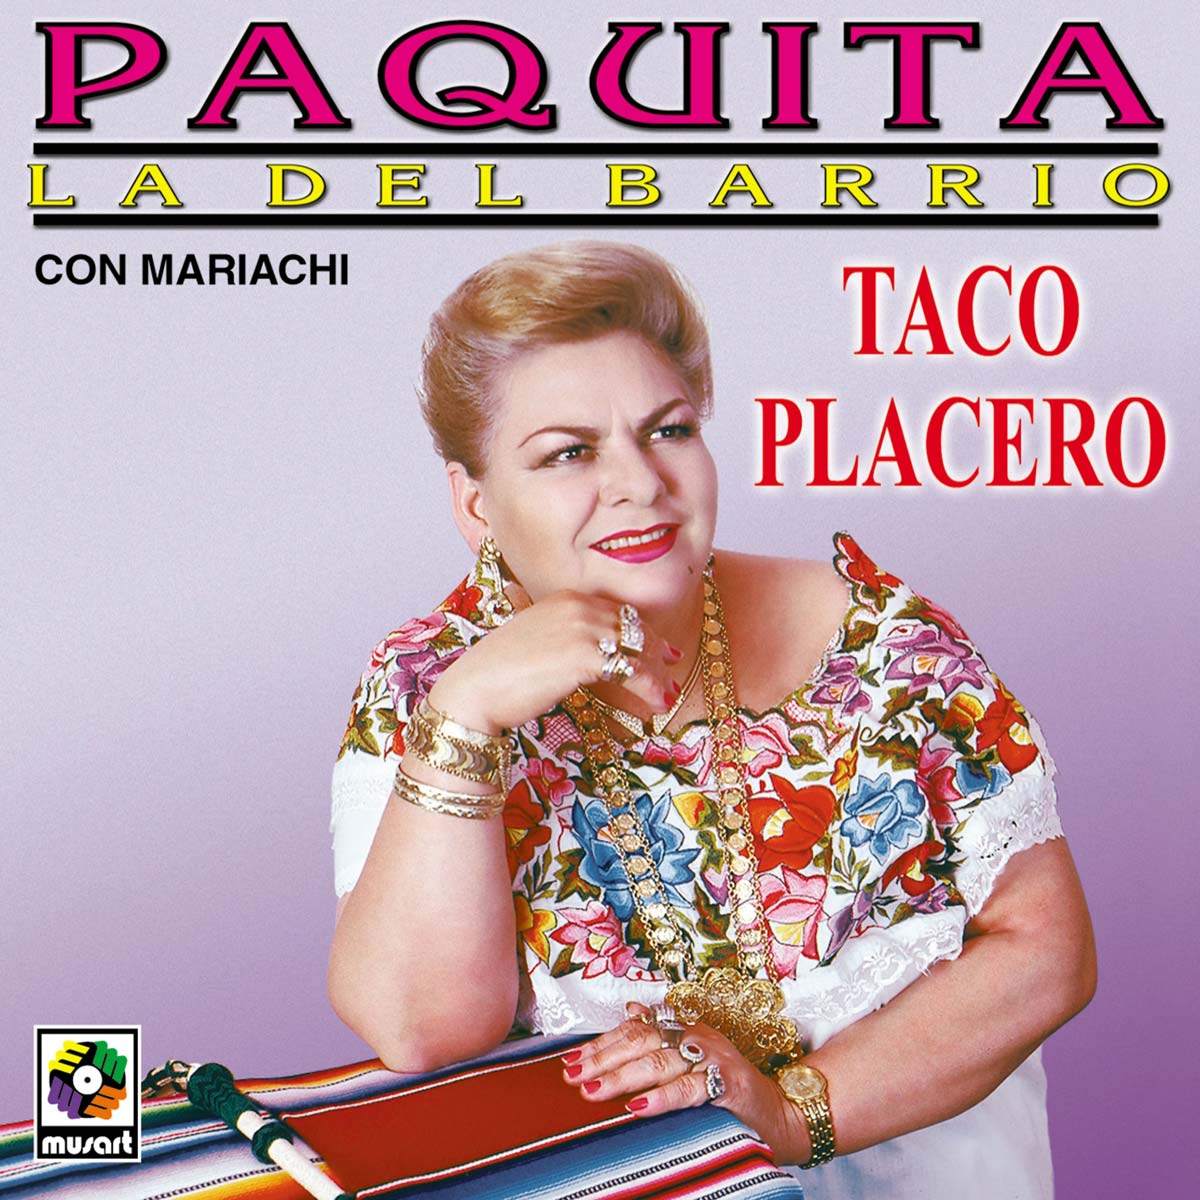 Featured Image for “Taco Placero”